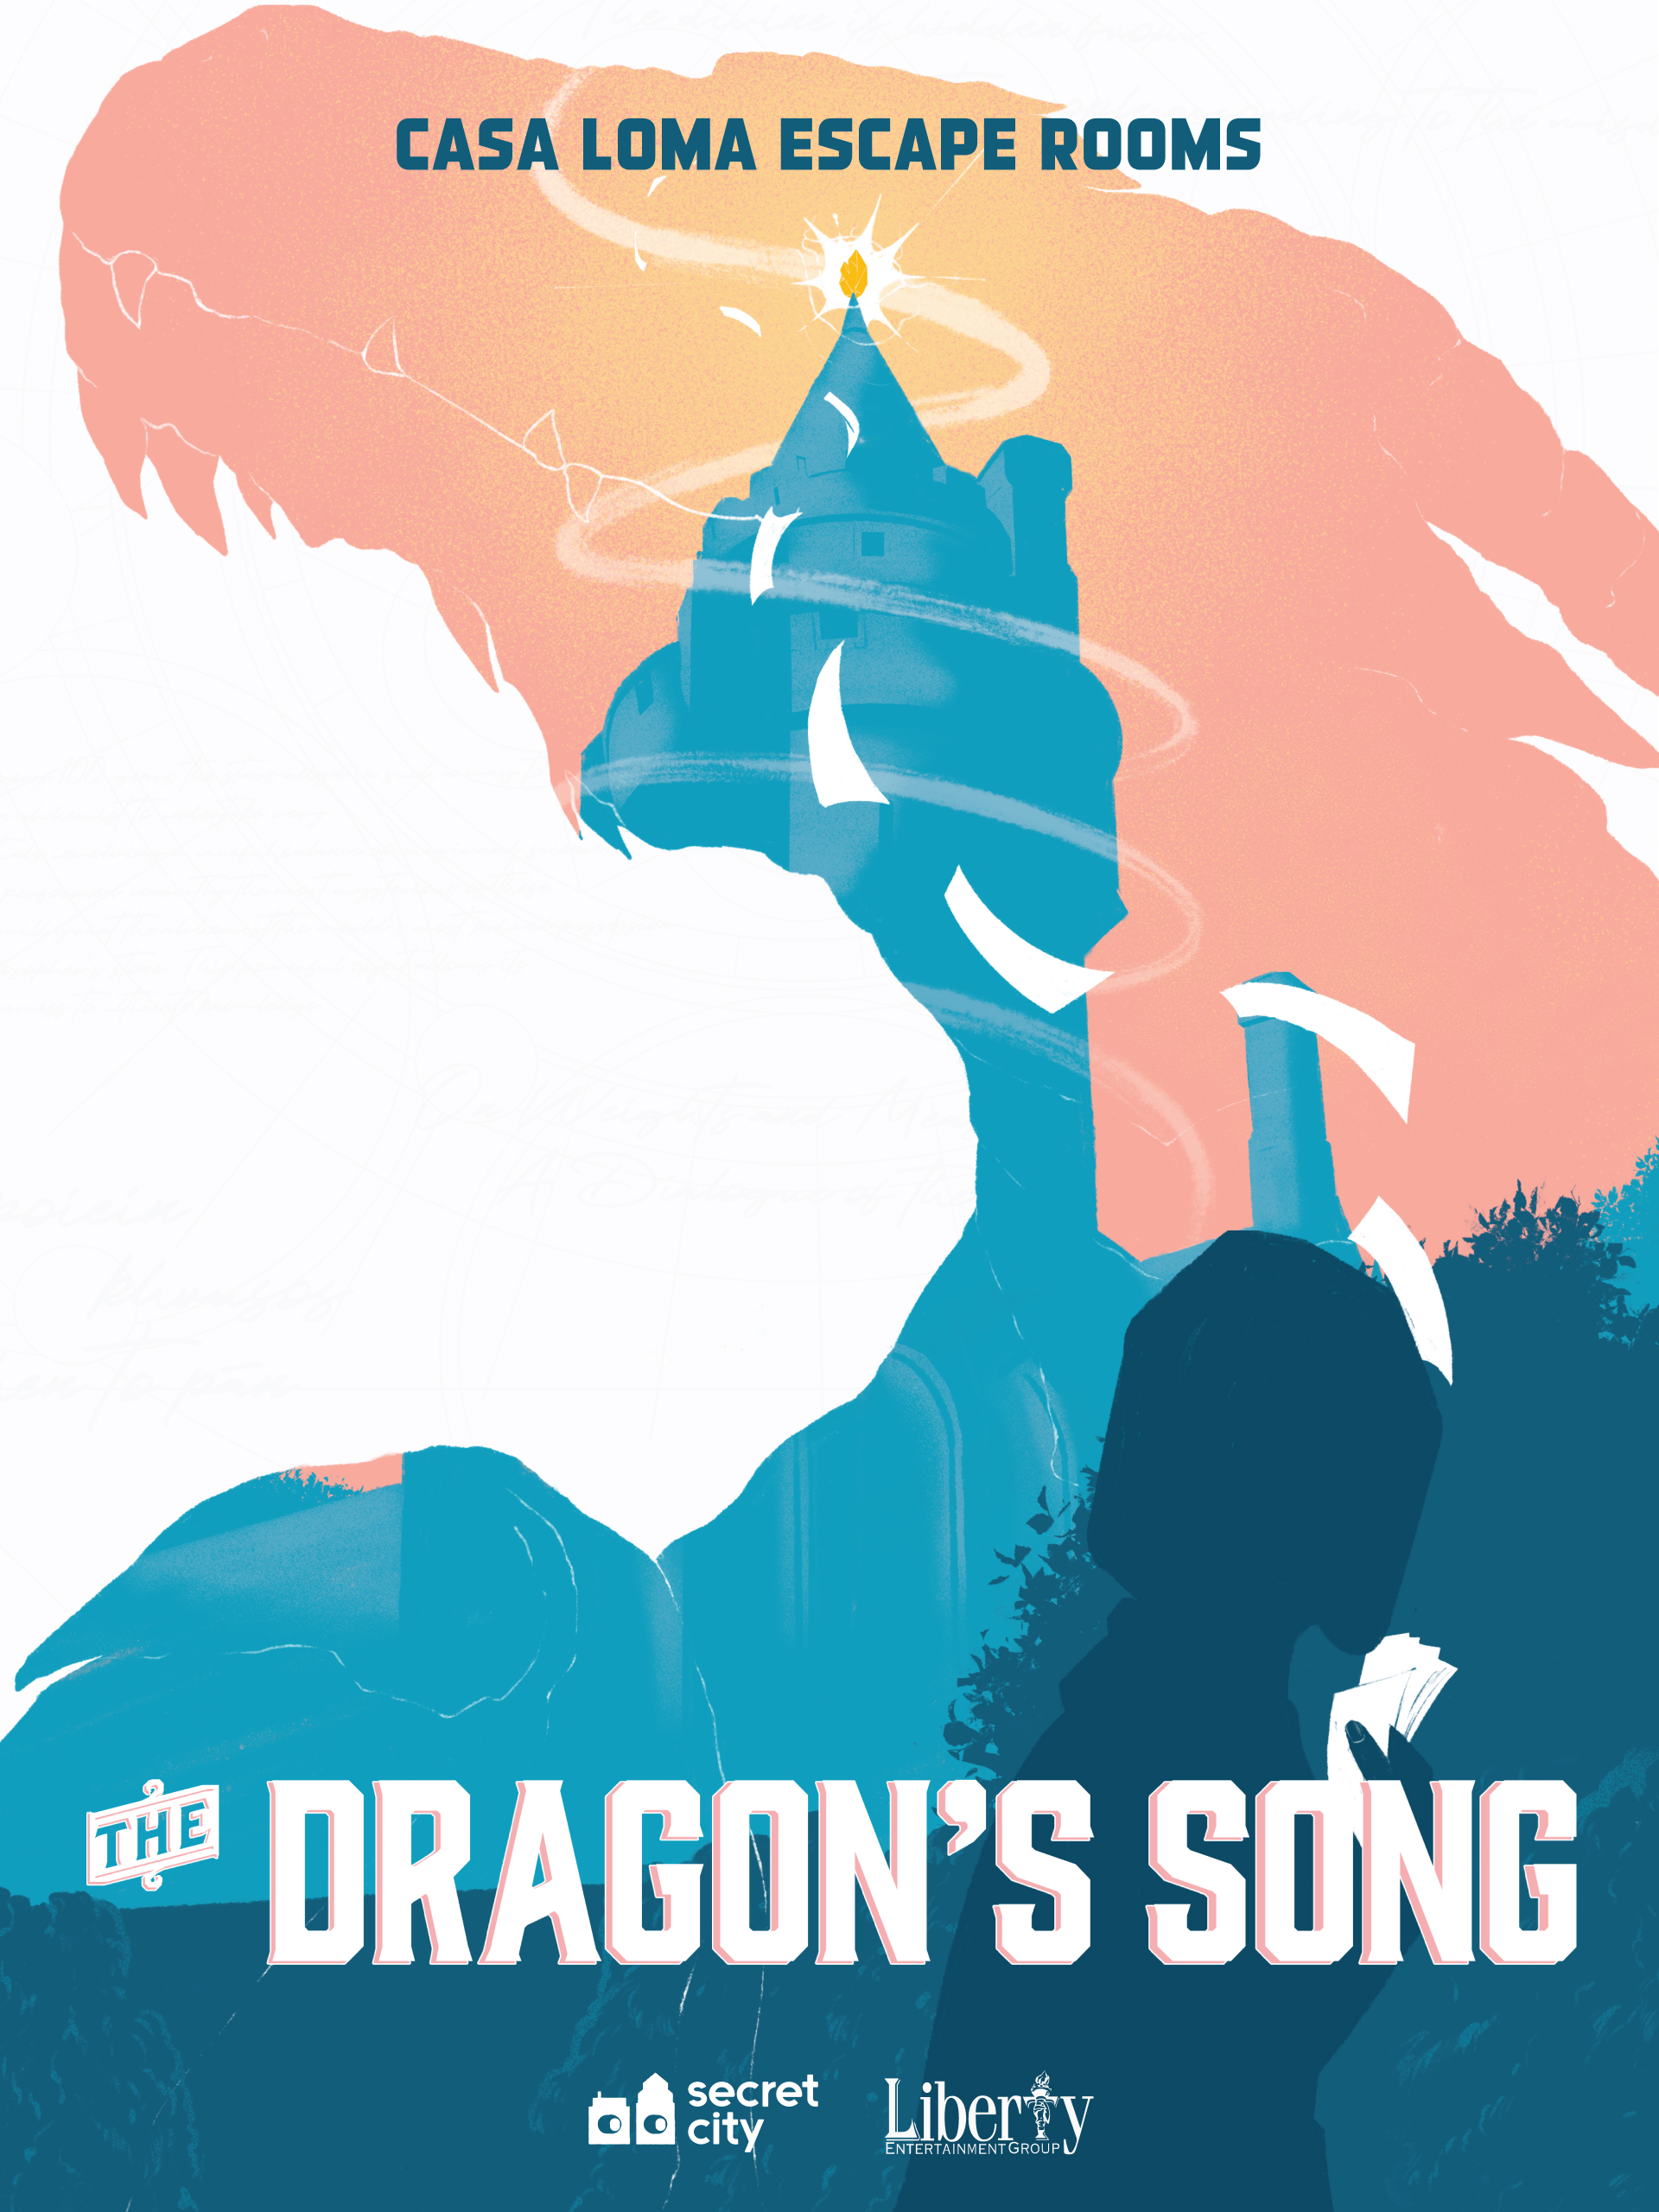 The Dragon’s Song